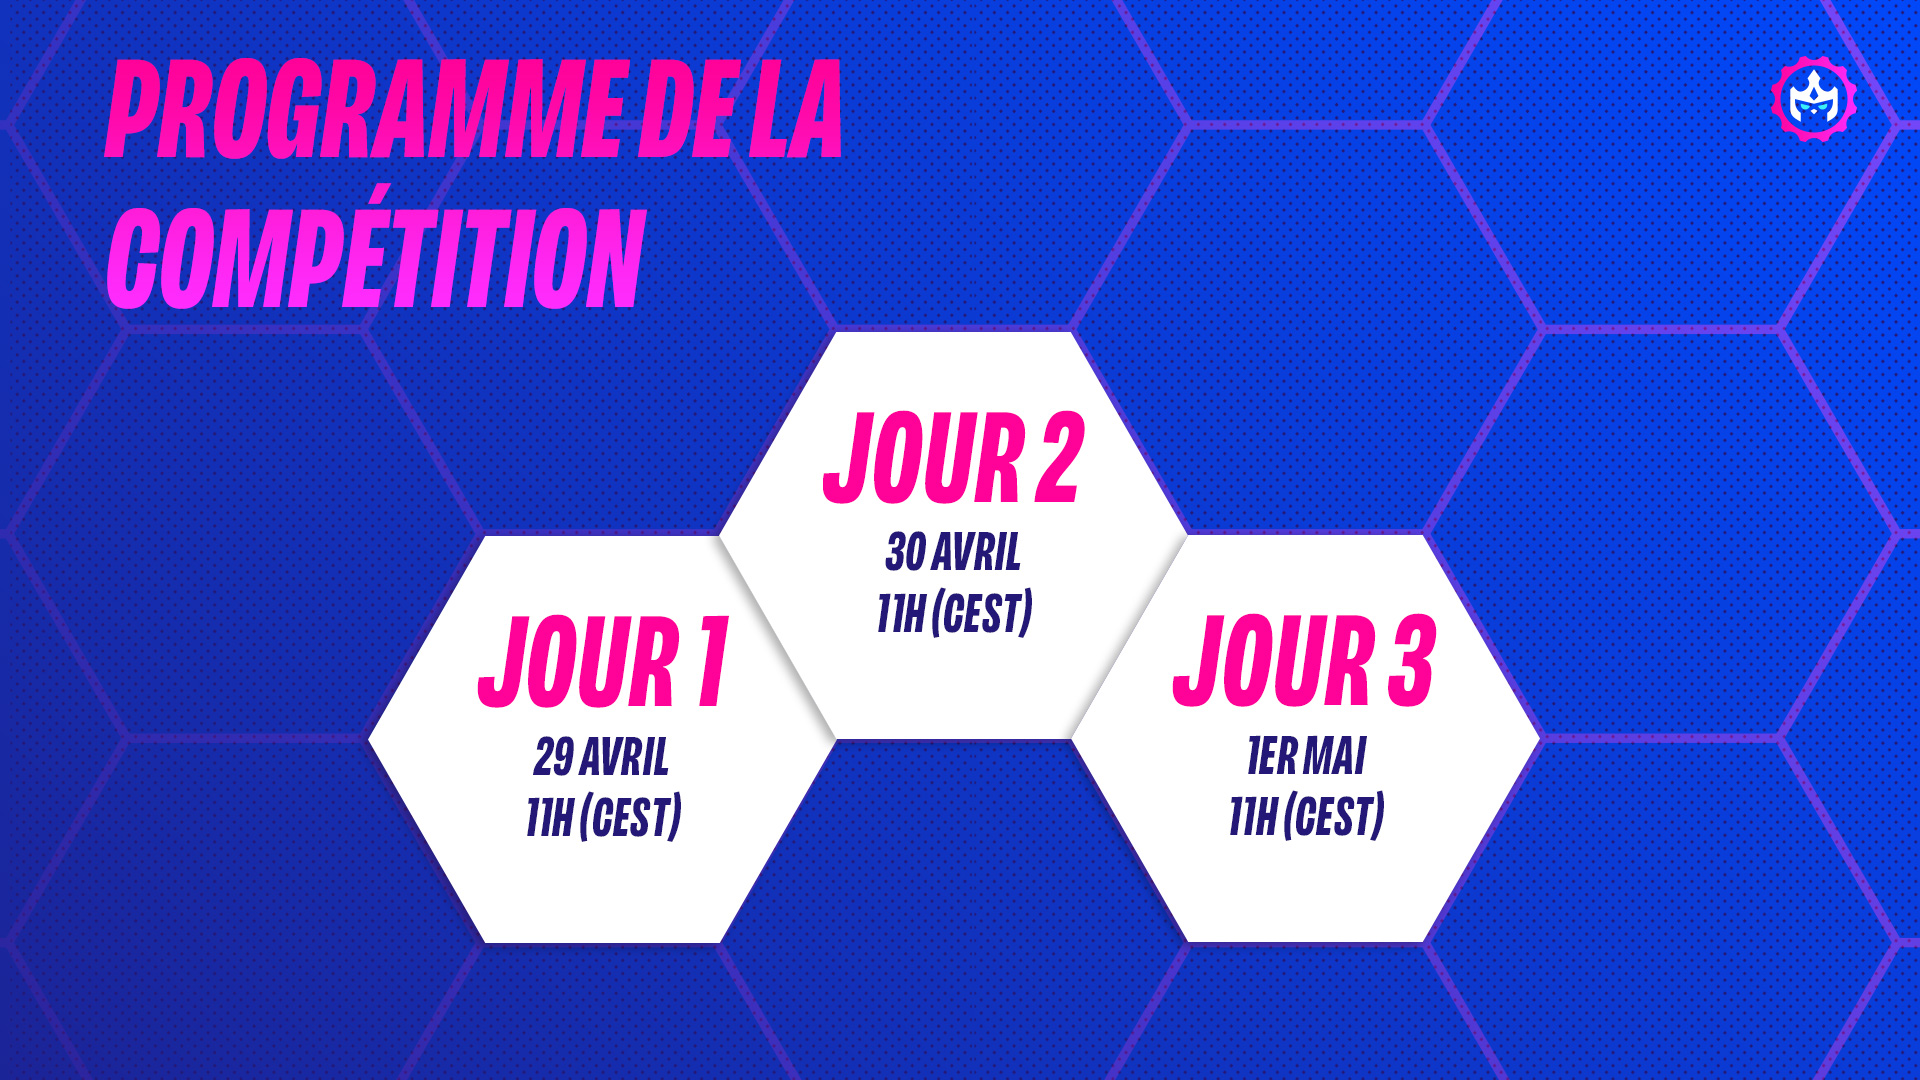 Competition_Schedule_Graphic_FR.jpg